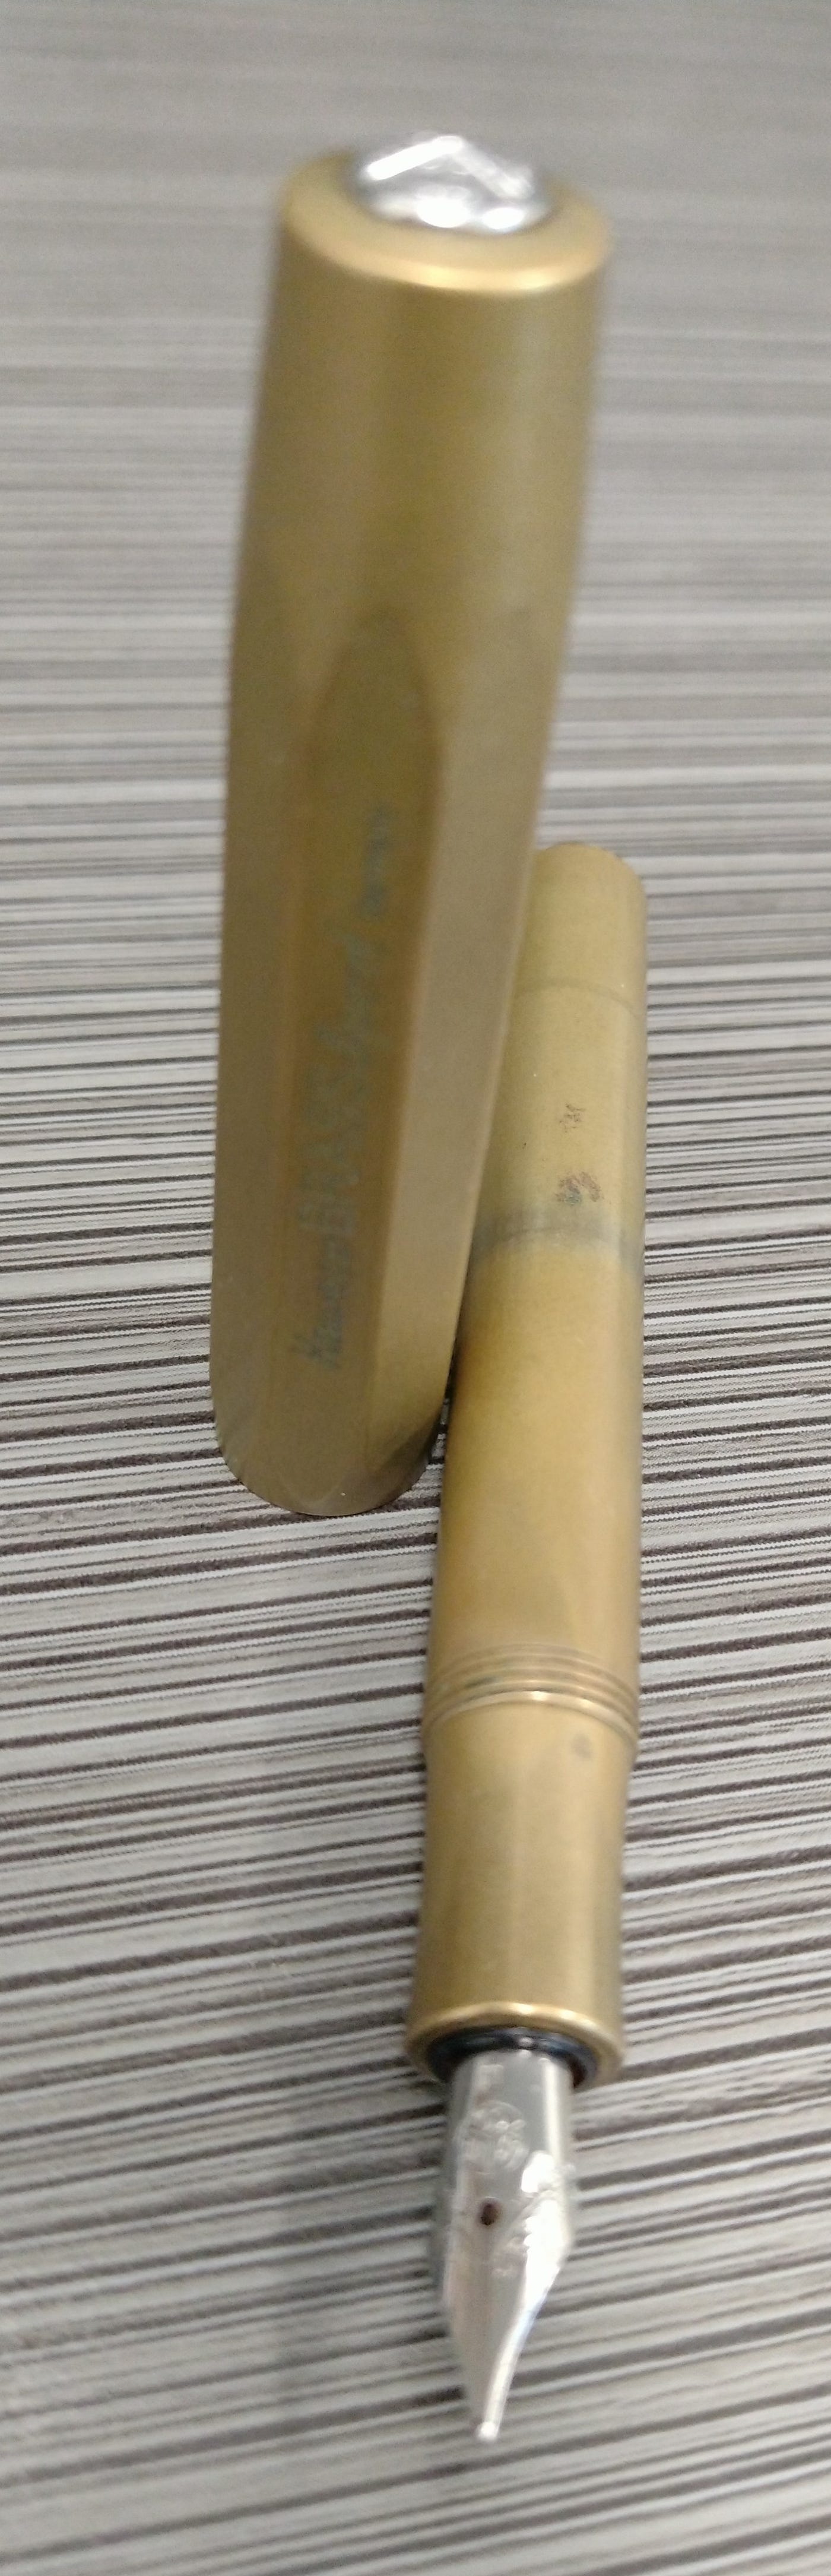 My 18 month old Kaweco Brass Sport. Inner barrel exposed for